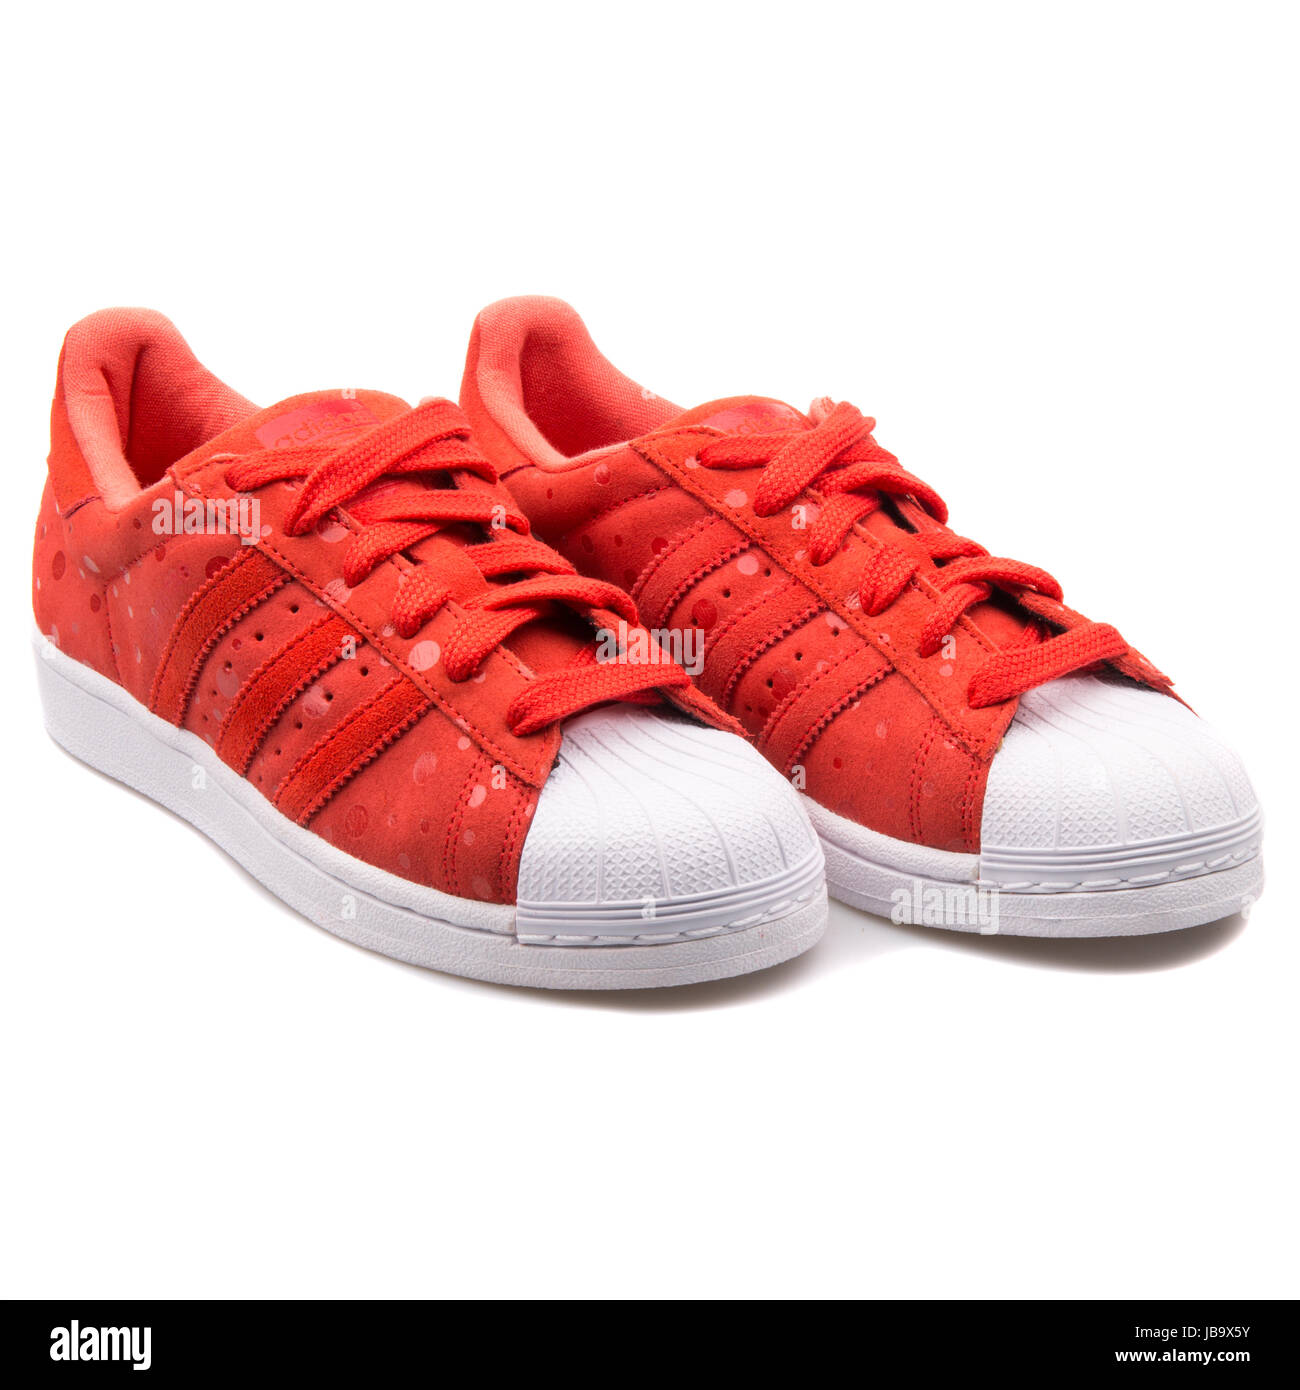 Adidas Superstar W Rouge Tomate Women's Sport Chaussures - S77411 Photo  Stock - Alamy